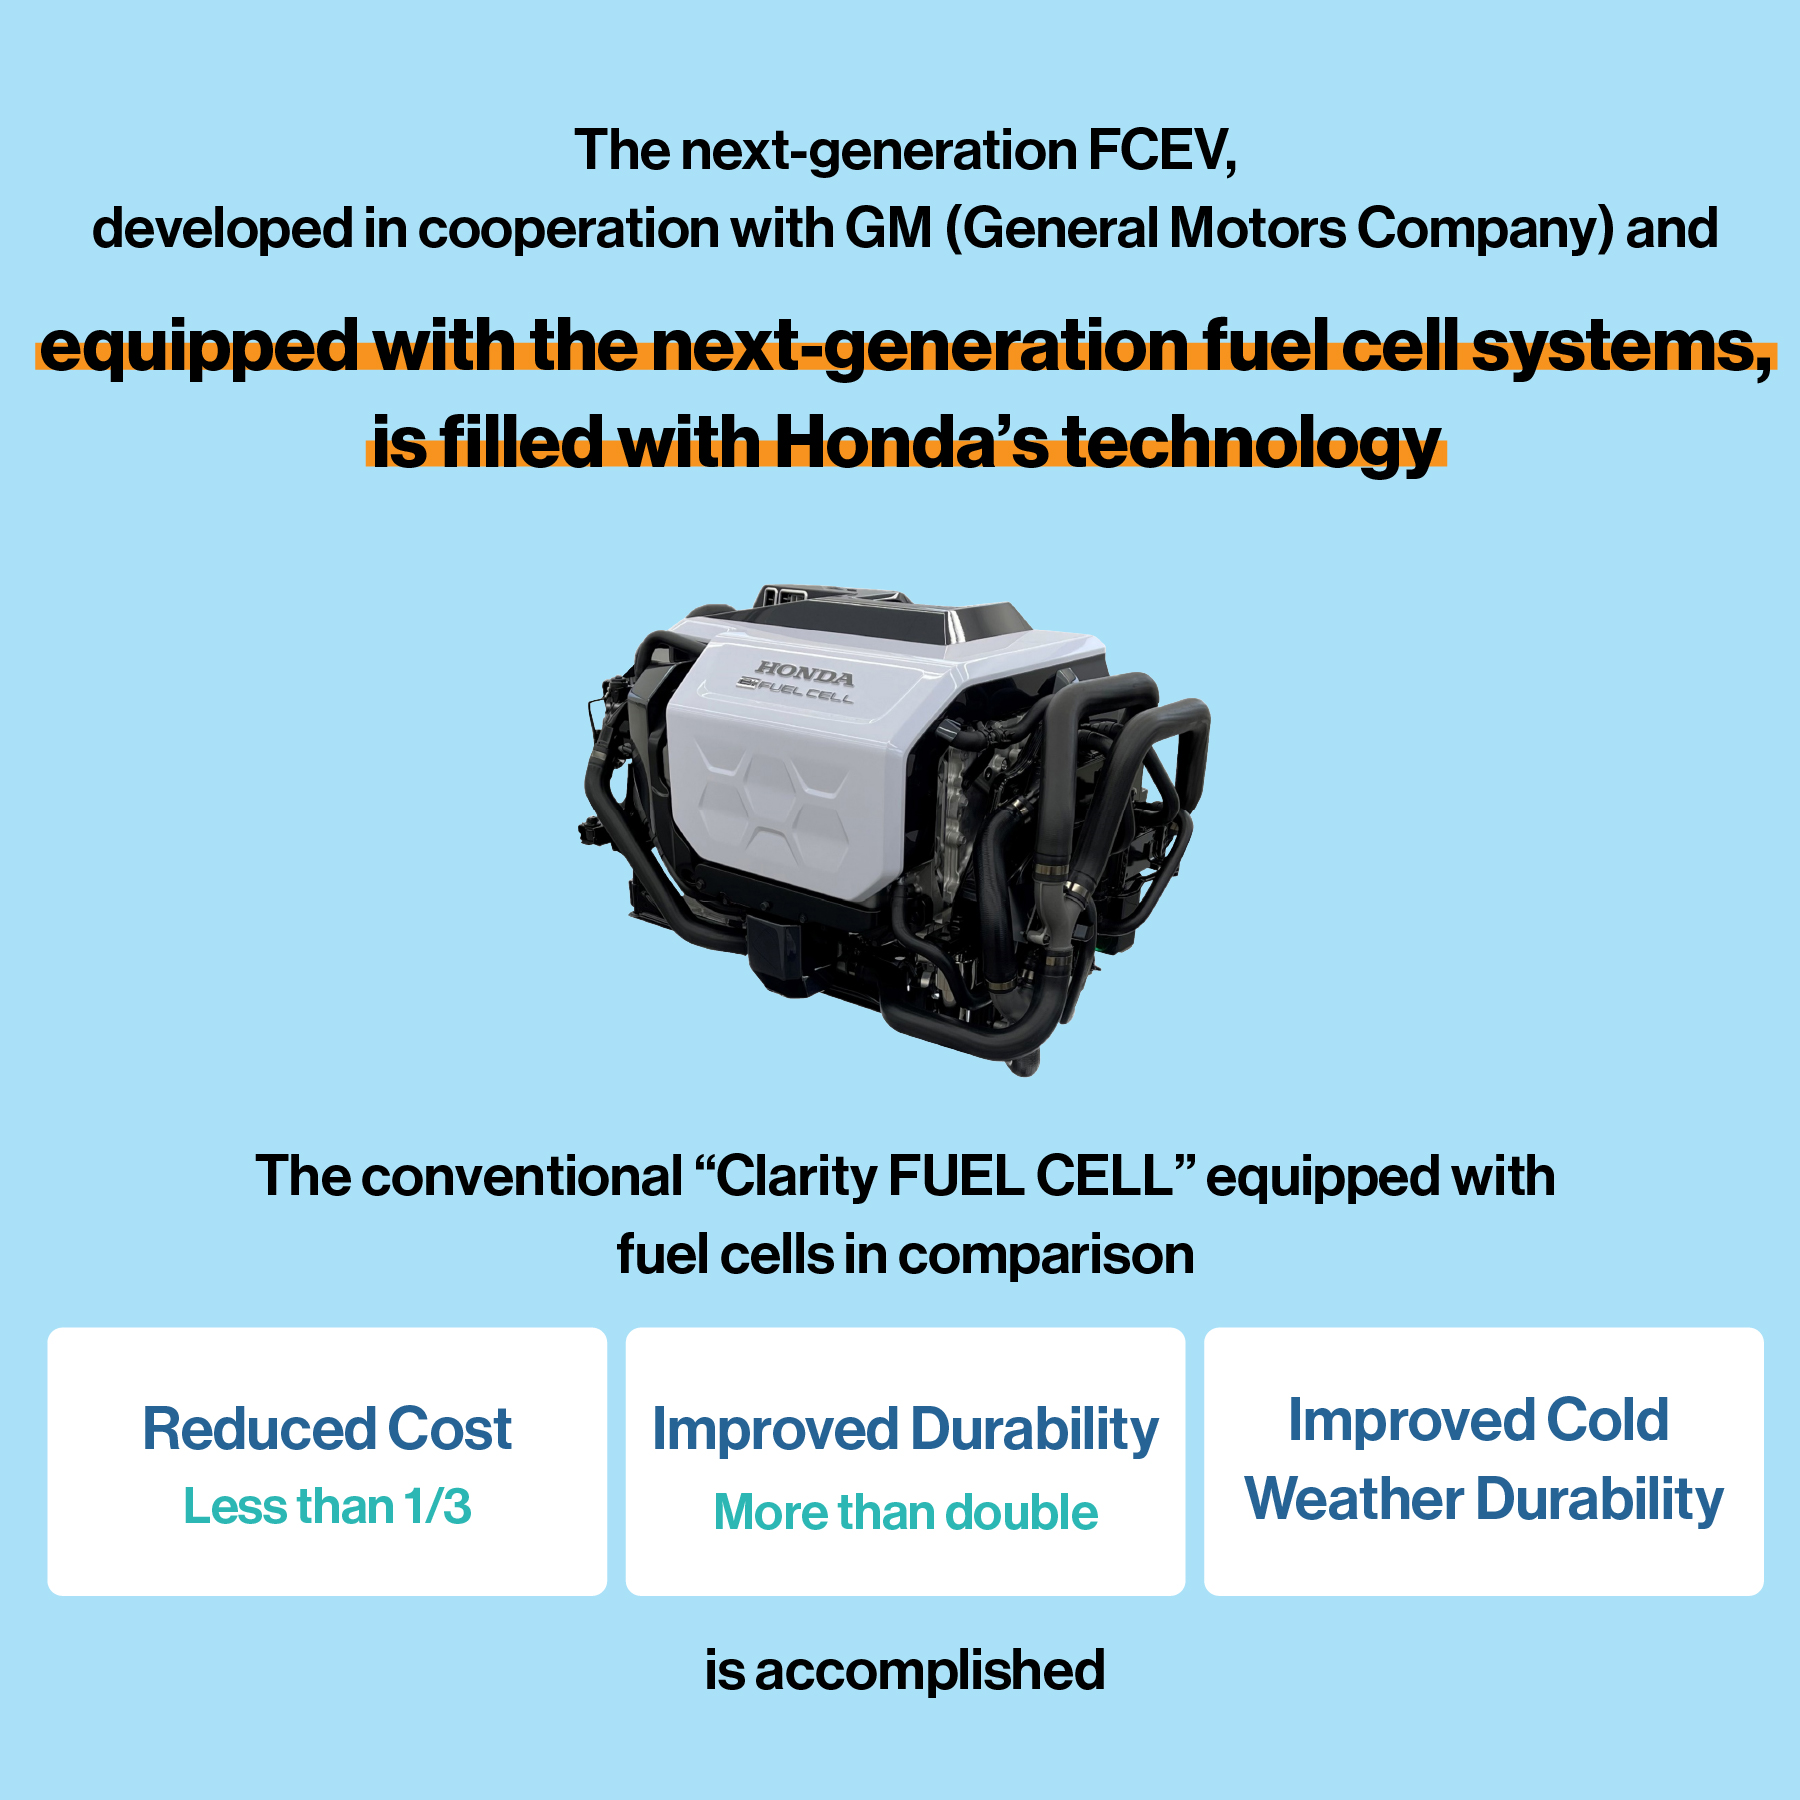 Honda's technology is packed into the next-generation fuel cell systems